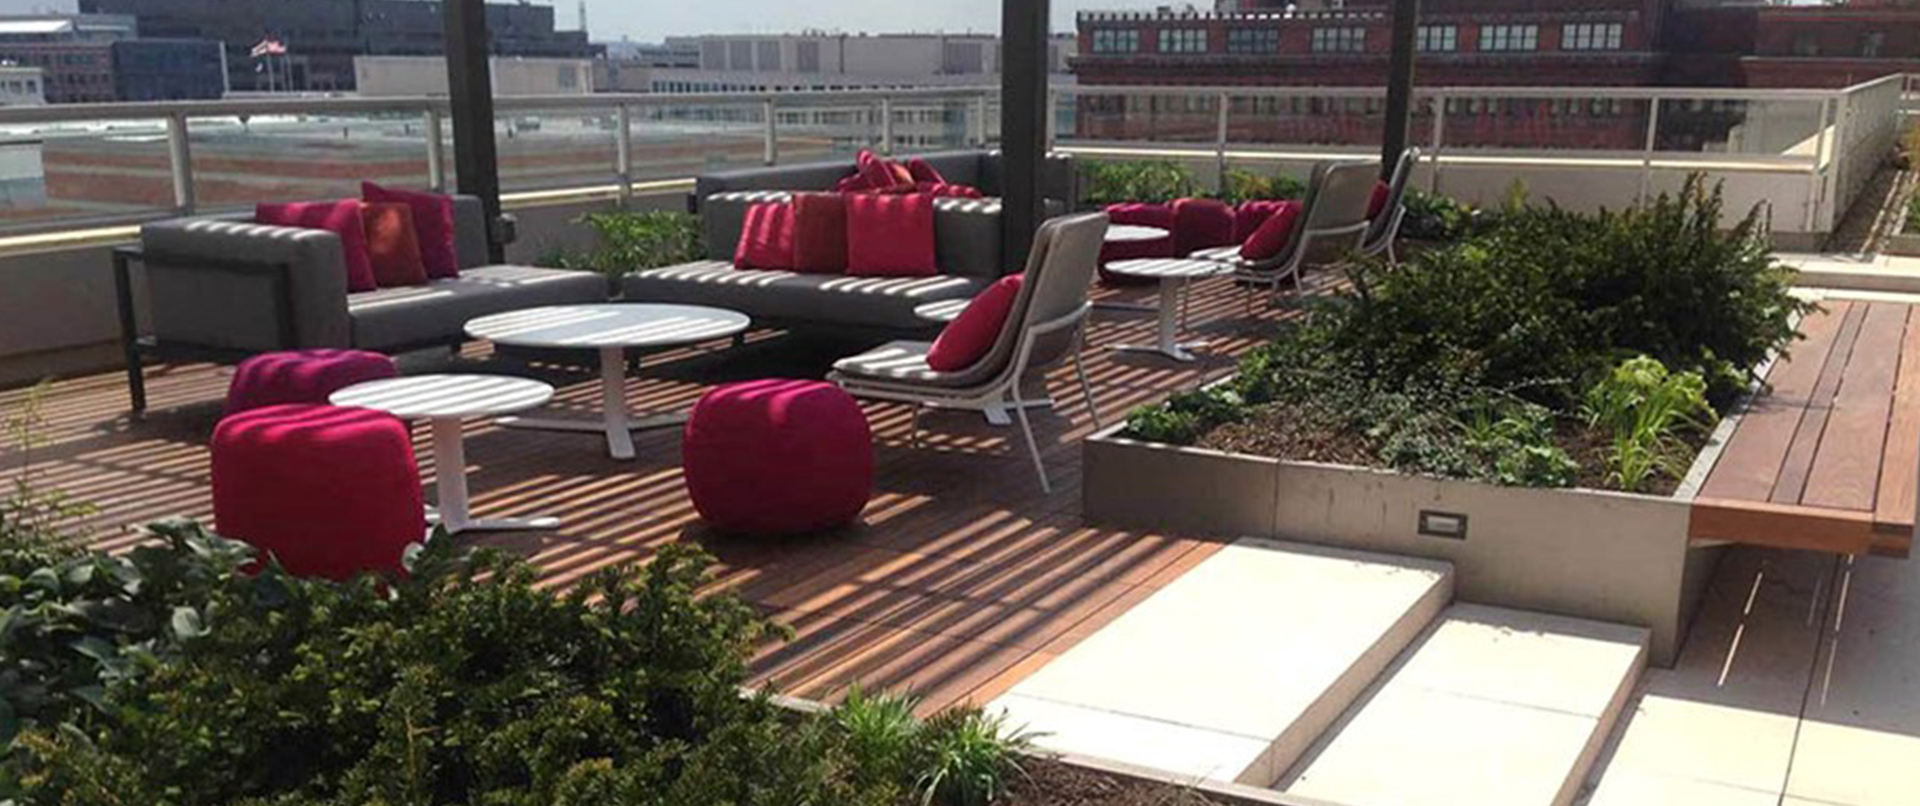 Green Rooftop with Planters